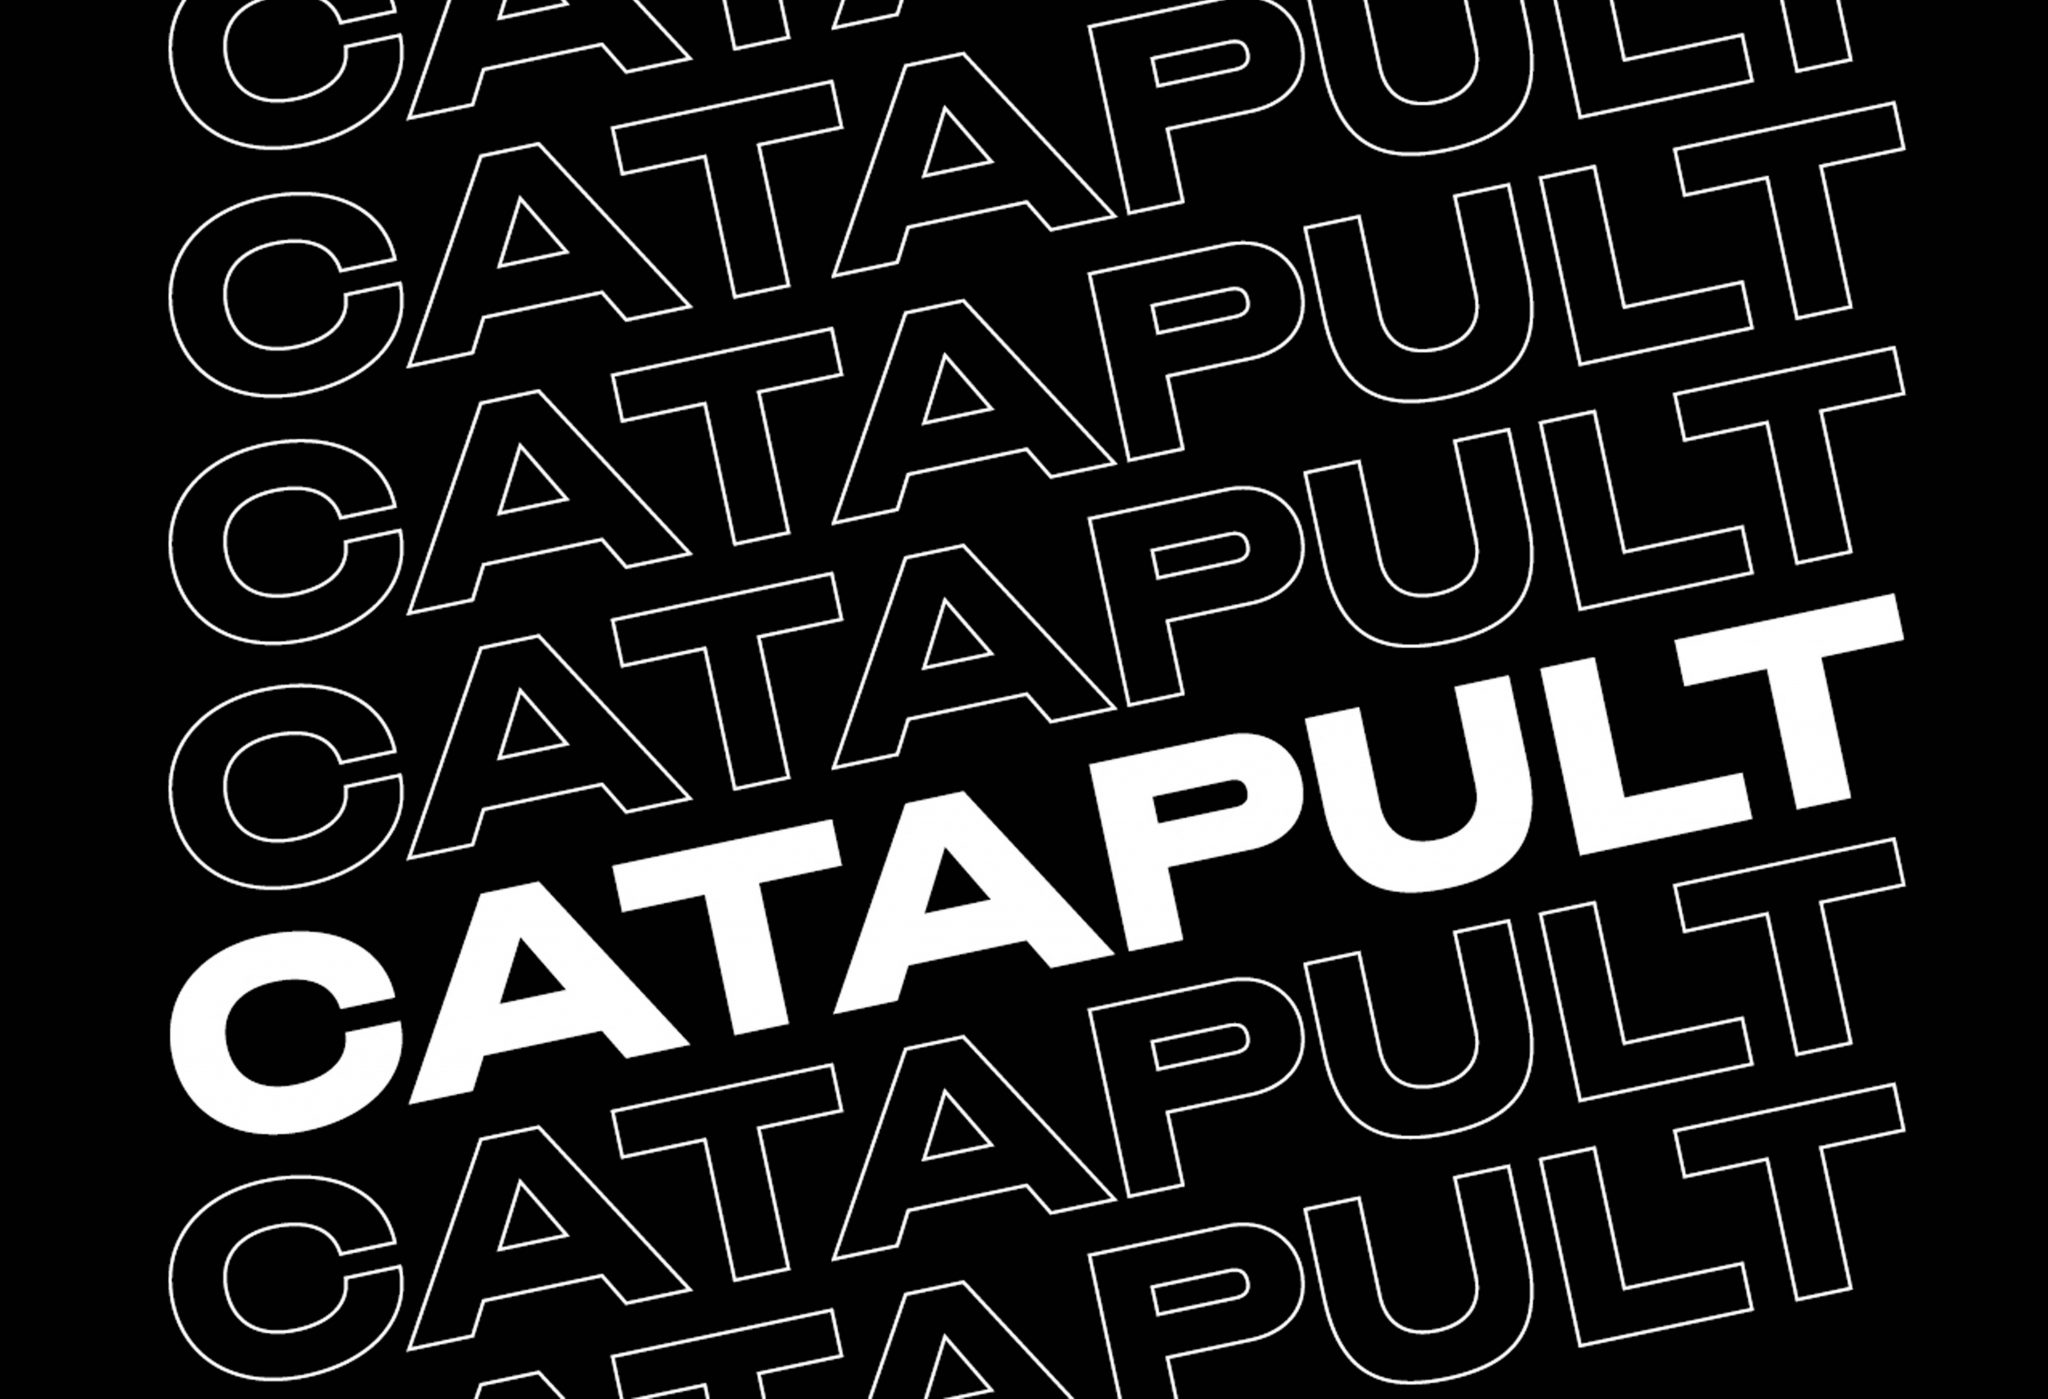 On a black background the white text reading 'catapult' appears in a repetitive pattern